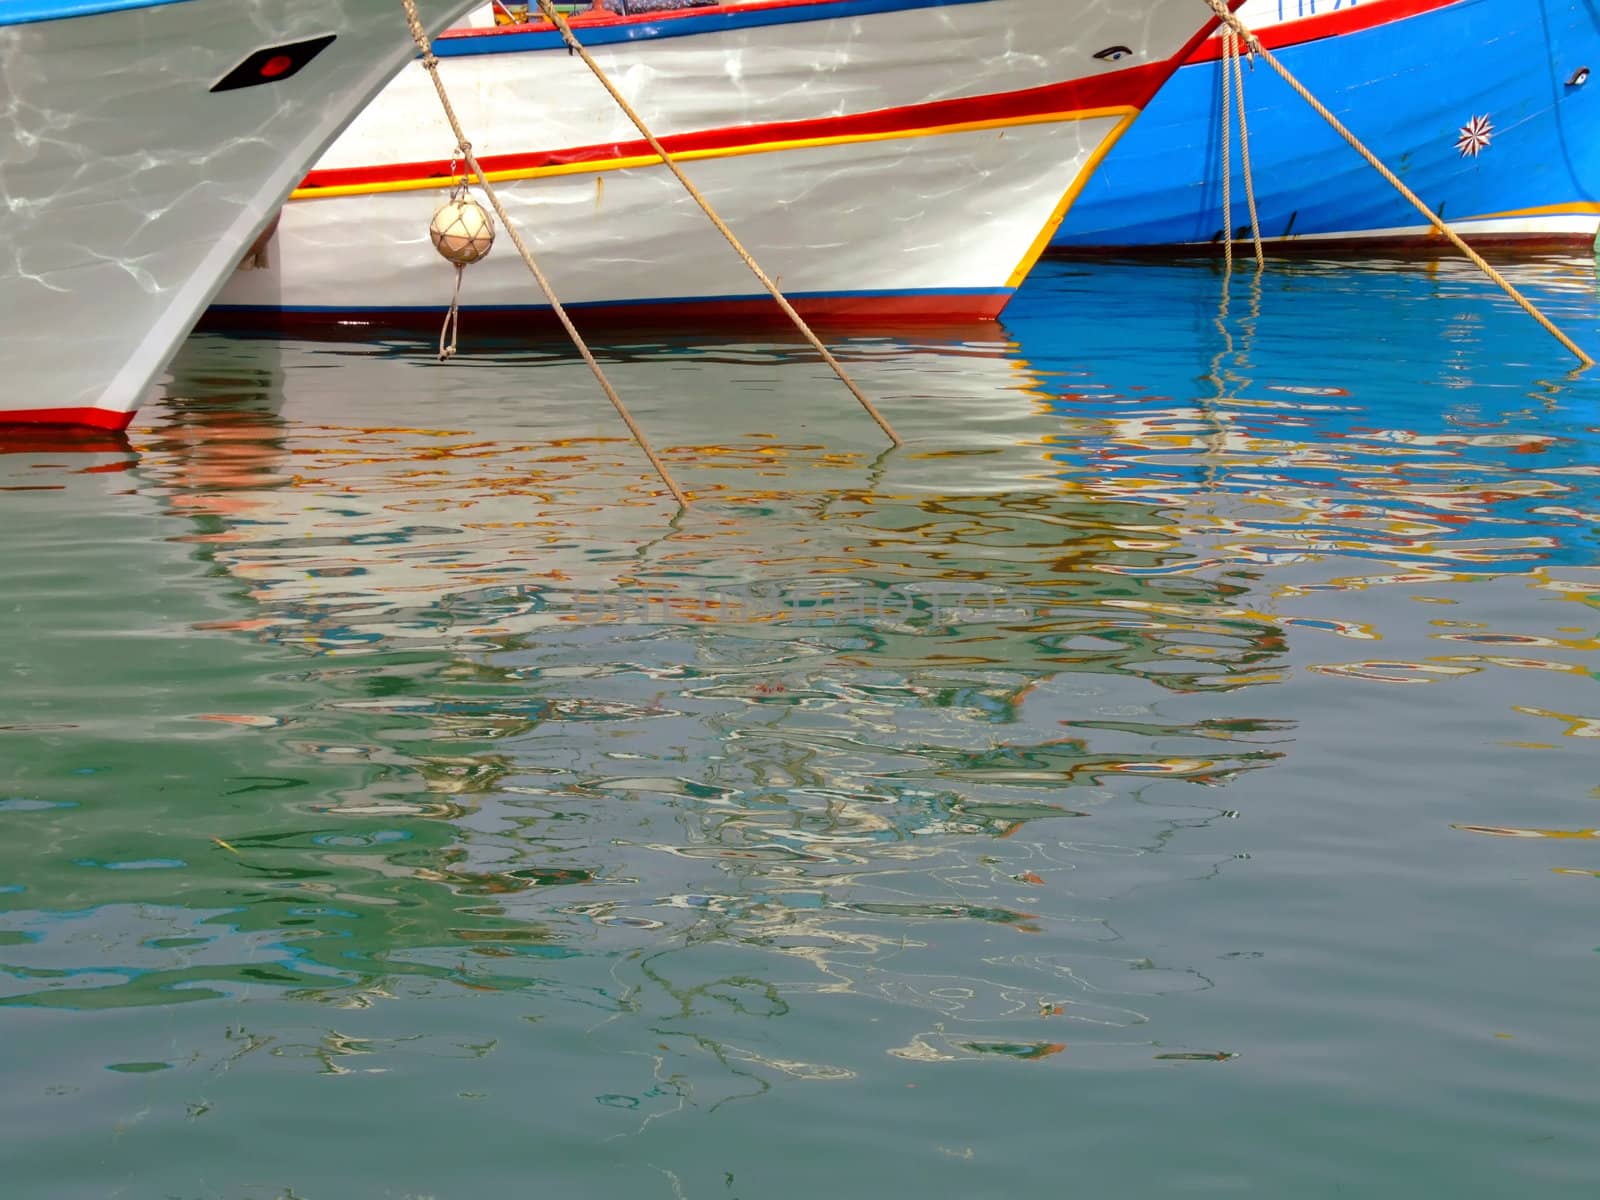 Moored yachts reflected in calm ocean waters, creating a soothing abstract effect